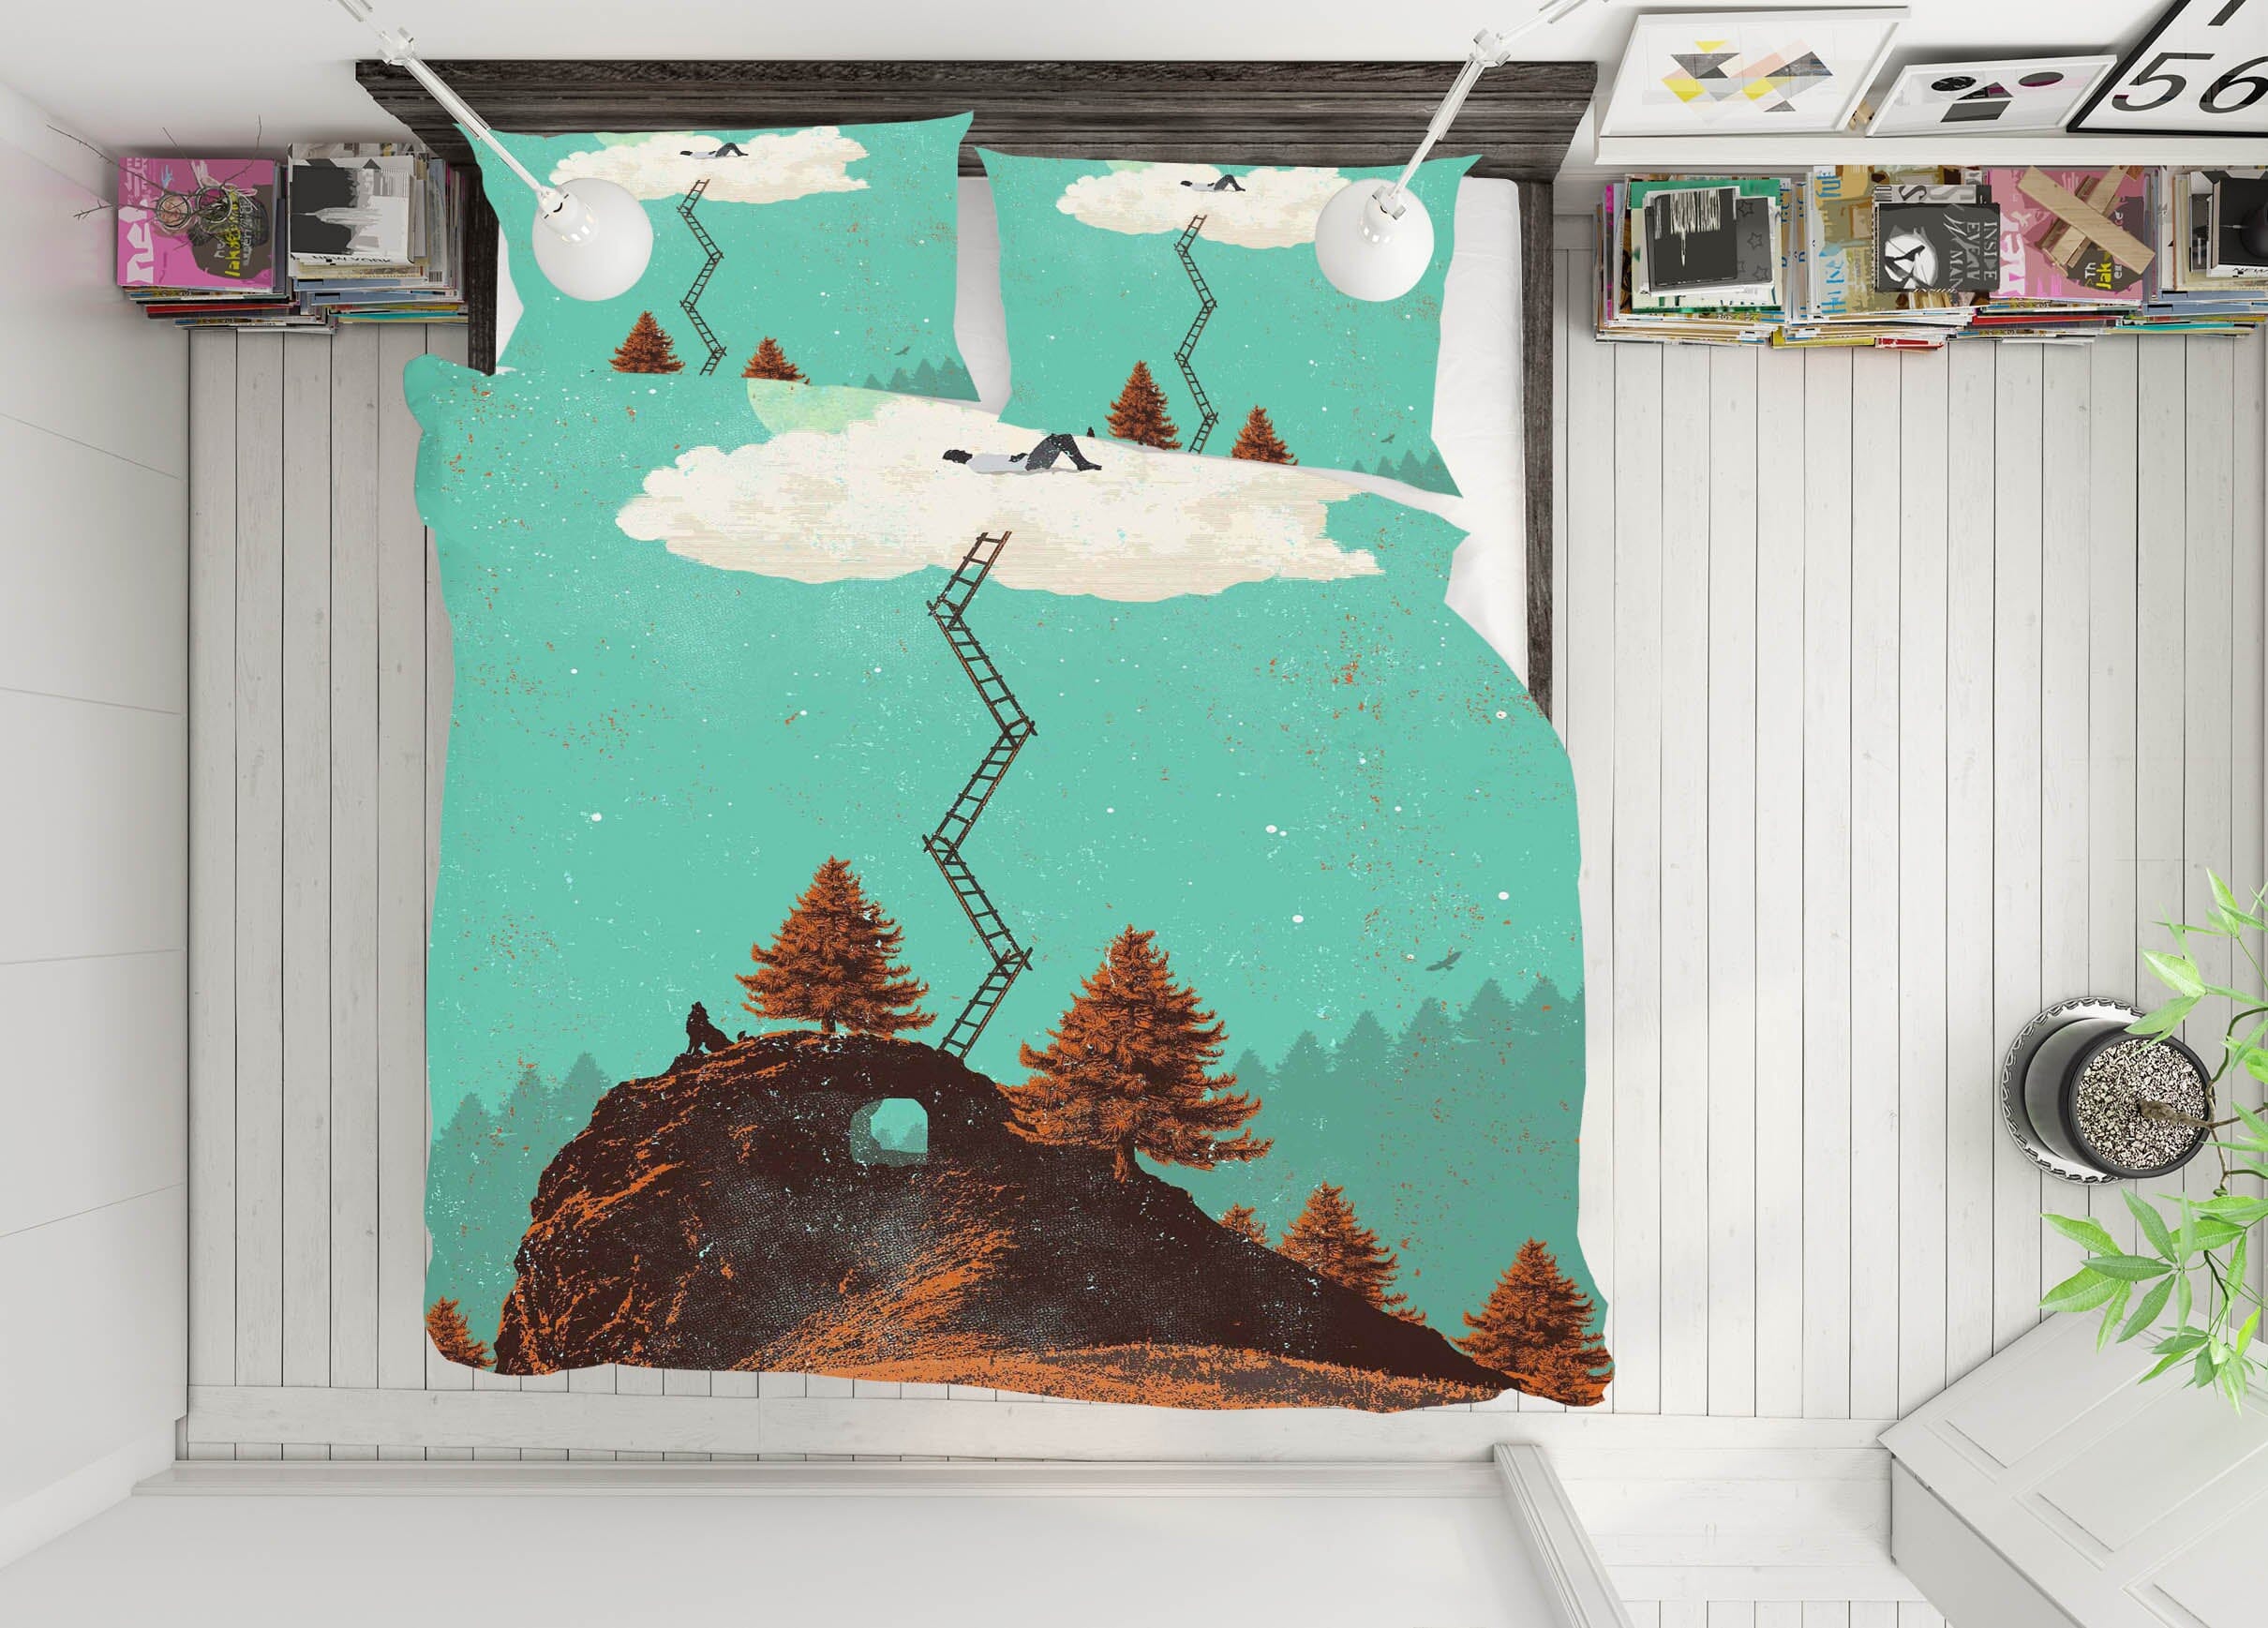 3D Cloud Dreaming 2101 Showdeer Bedding Bed Pillowcases Quilt Quiet Covers AJ Creativity Home 